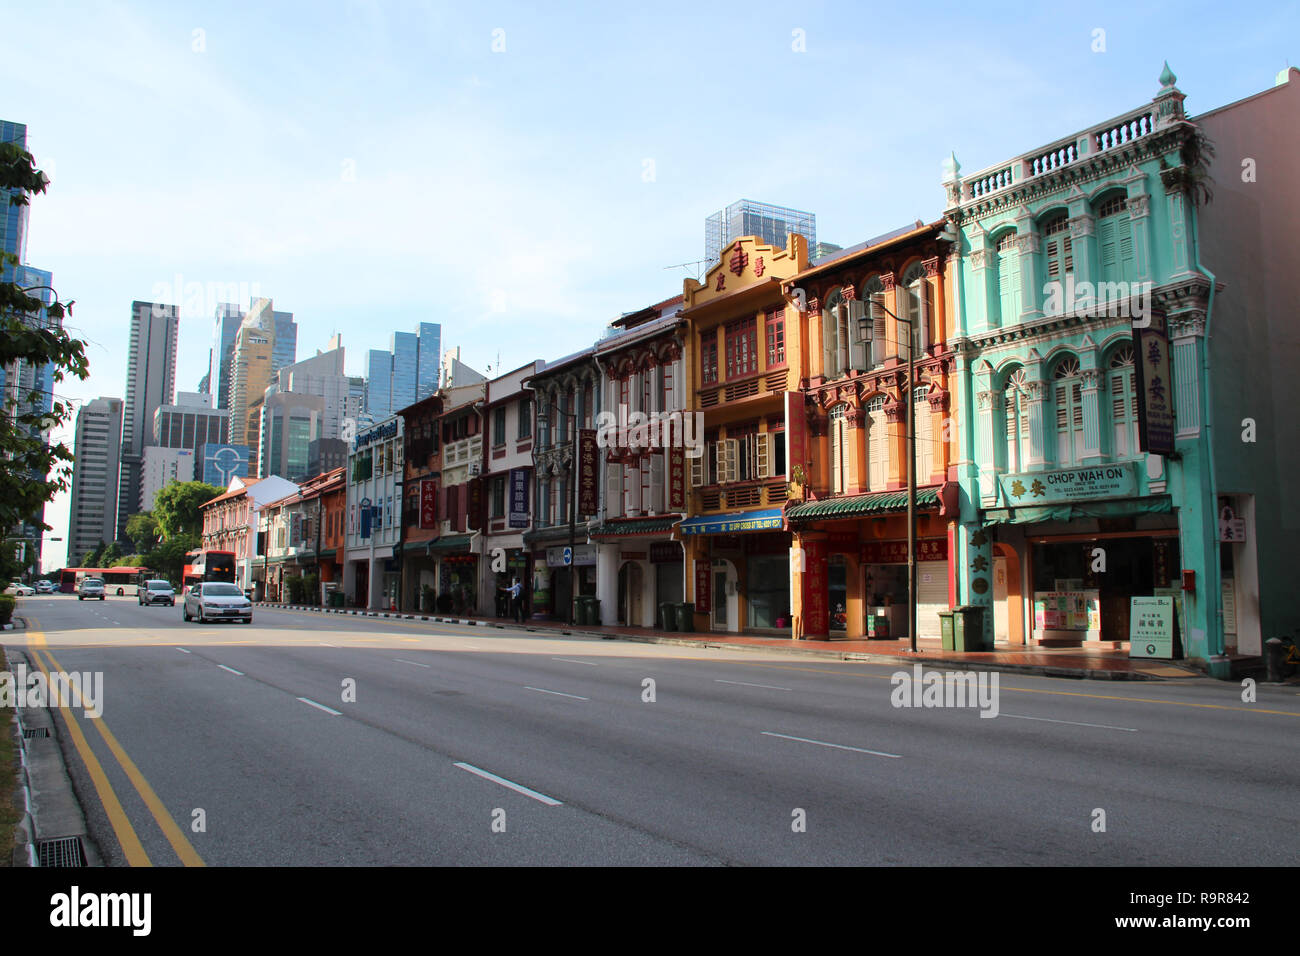 The Upper Cross Street in Singapour. Stock Photo